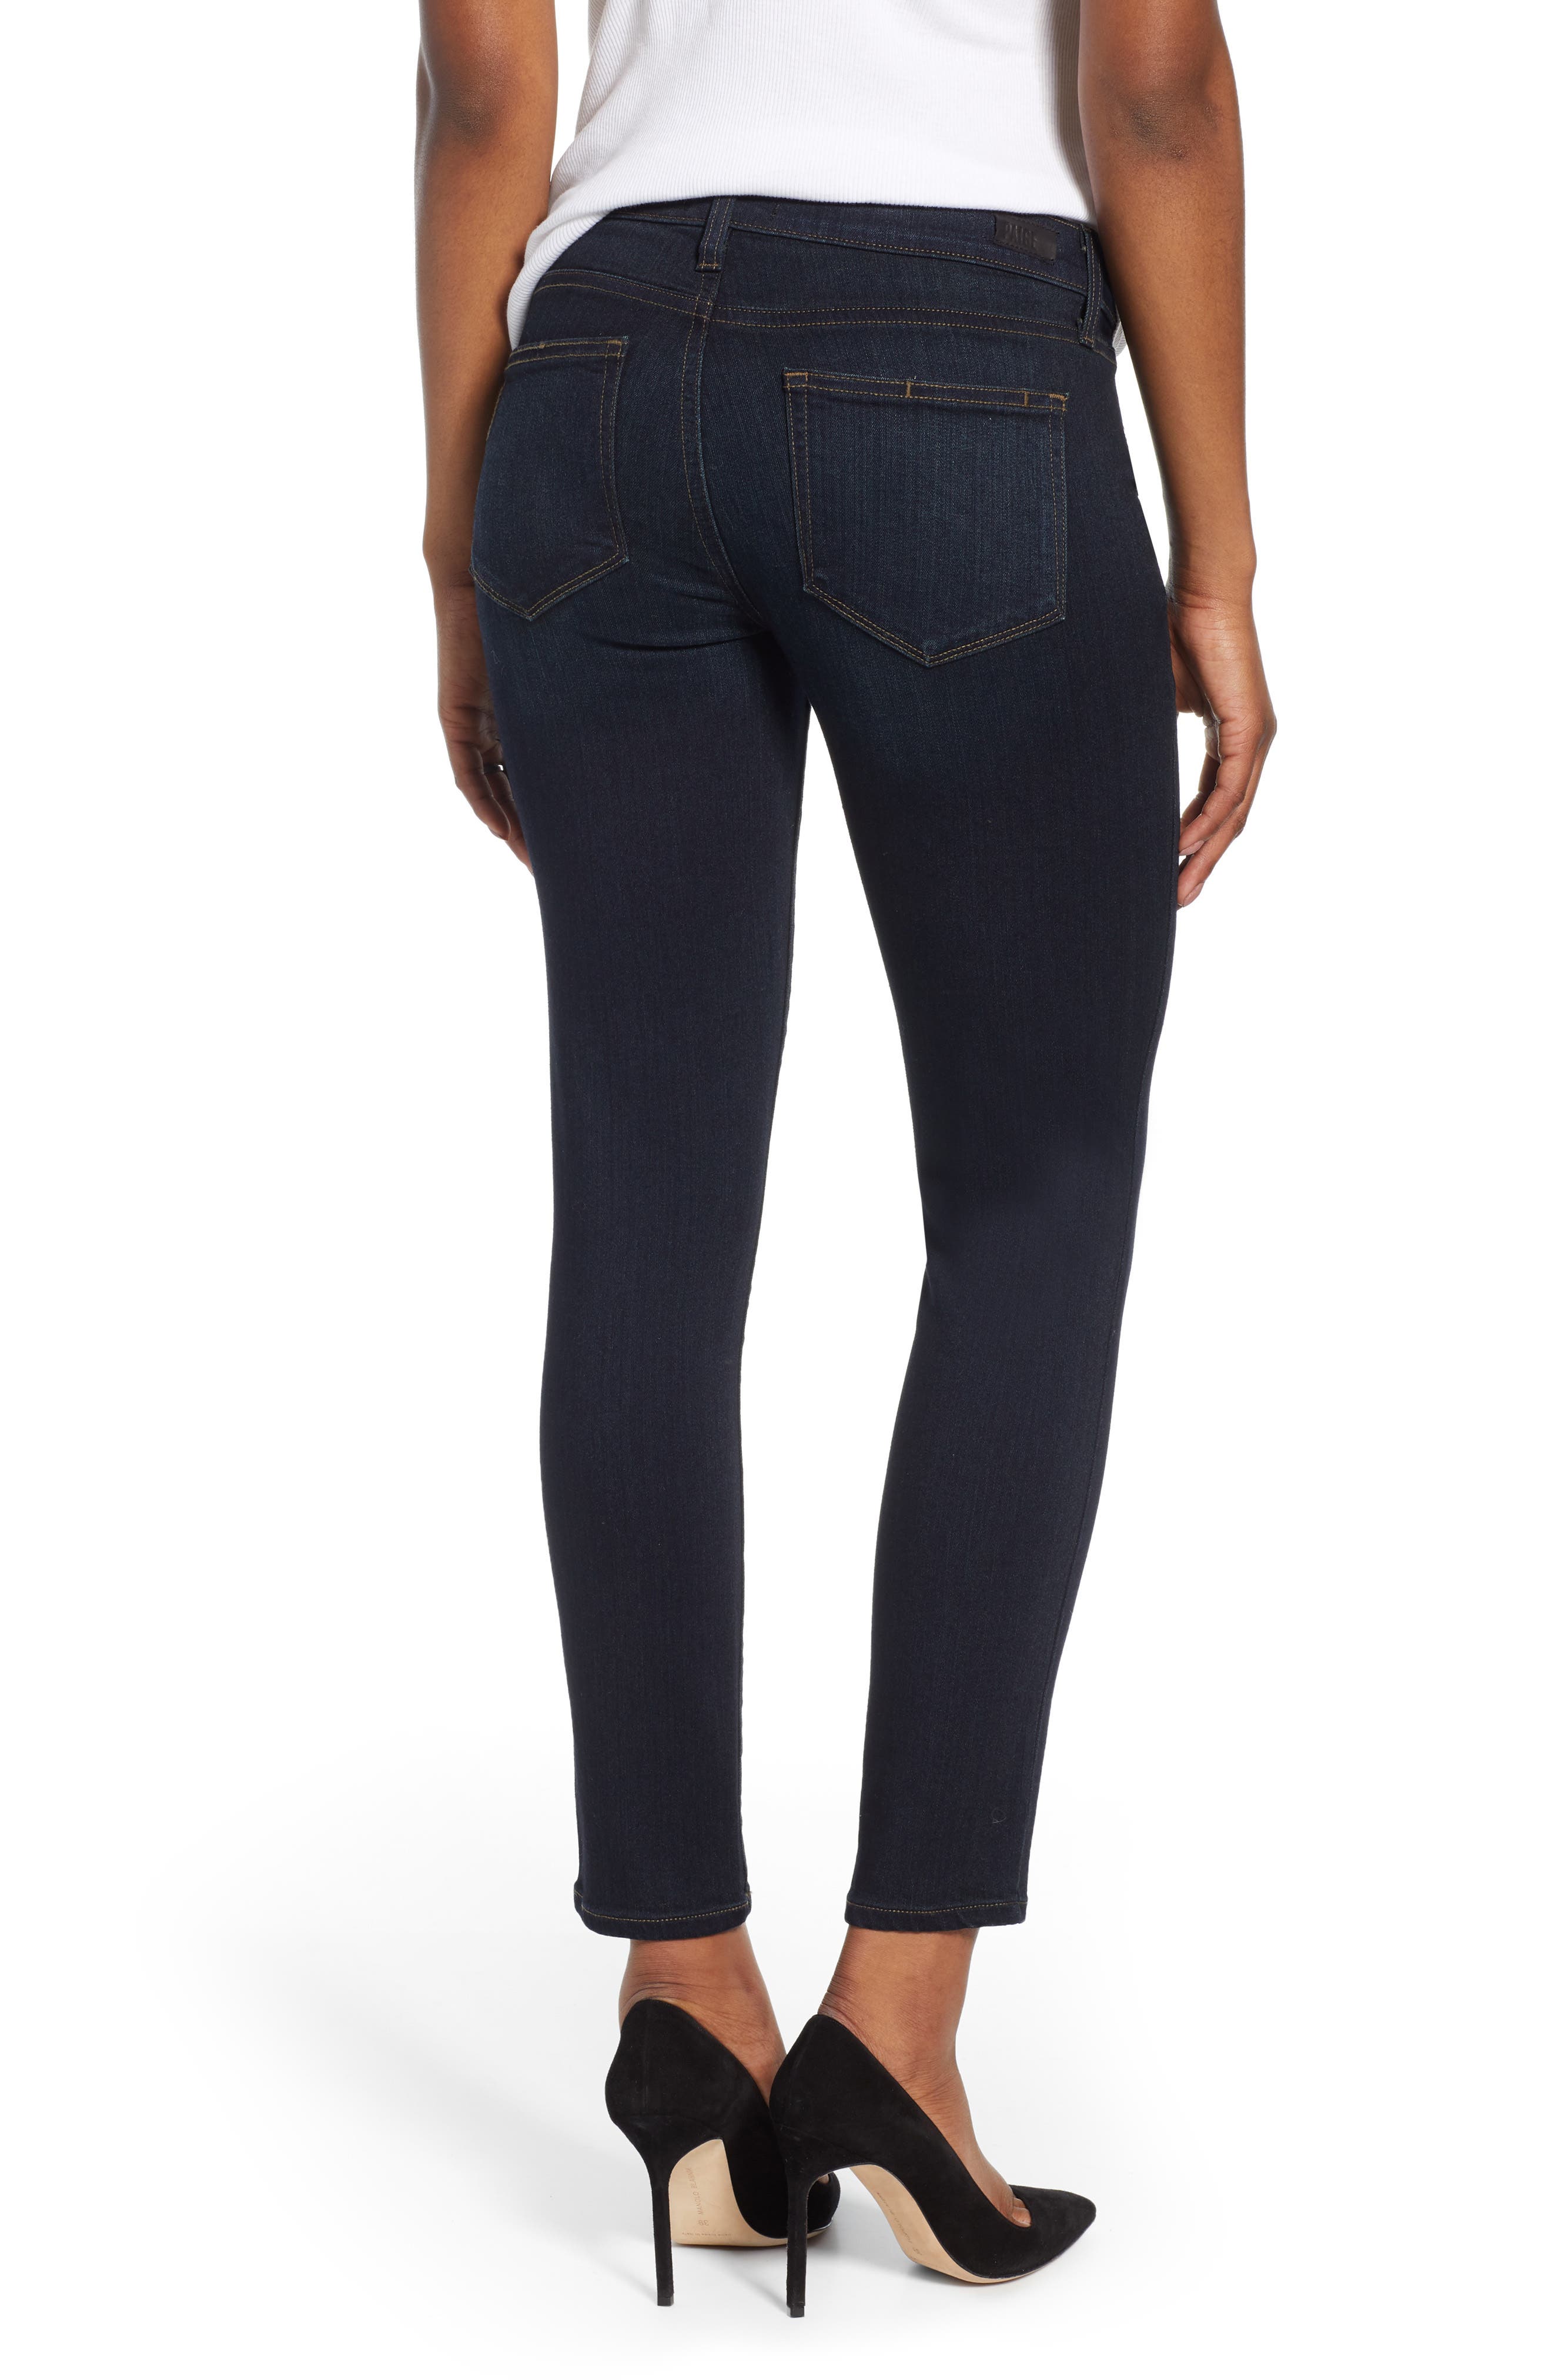 PAIGE Womens Verdugo Ankle Maternity Jeans